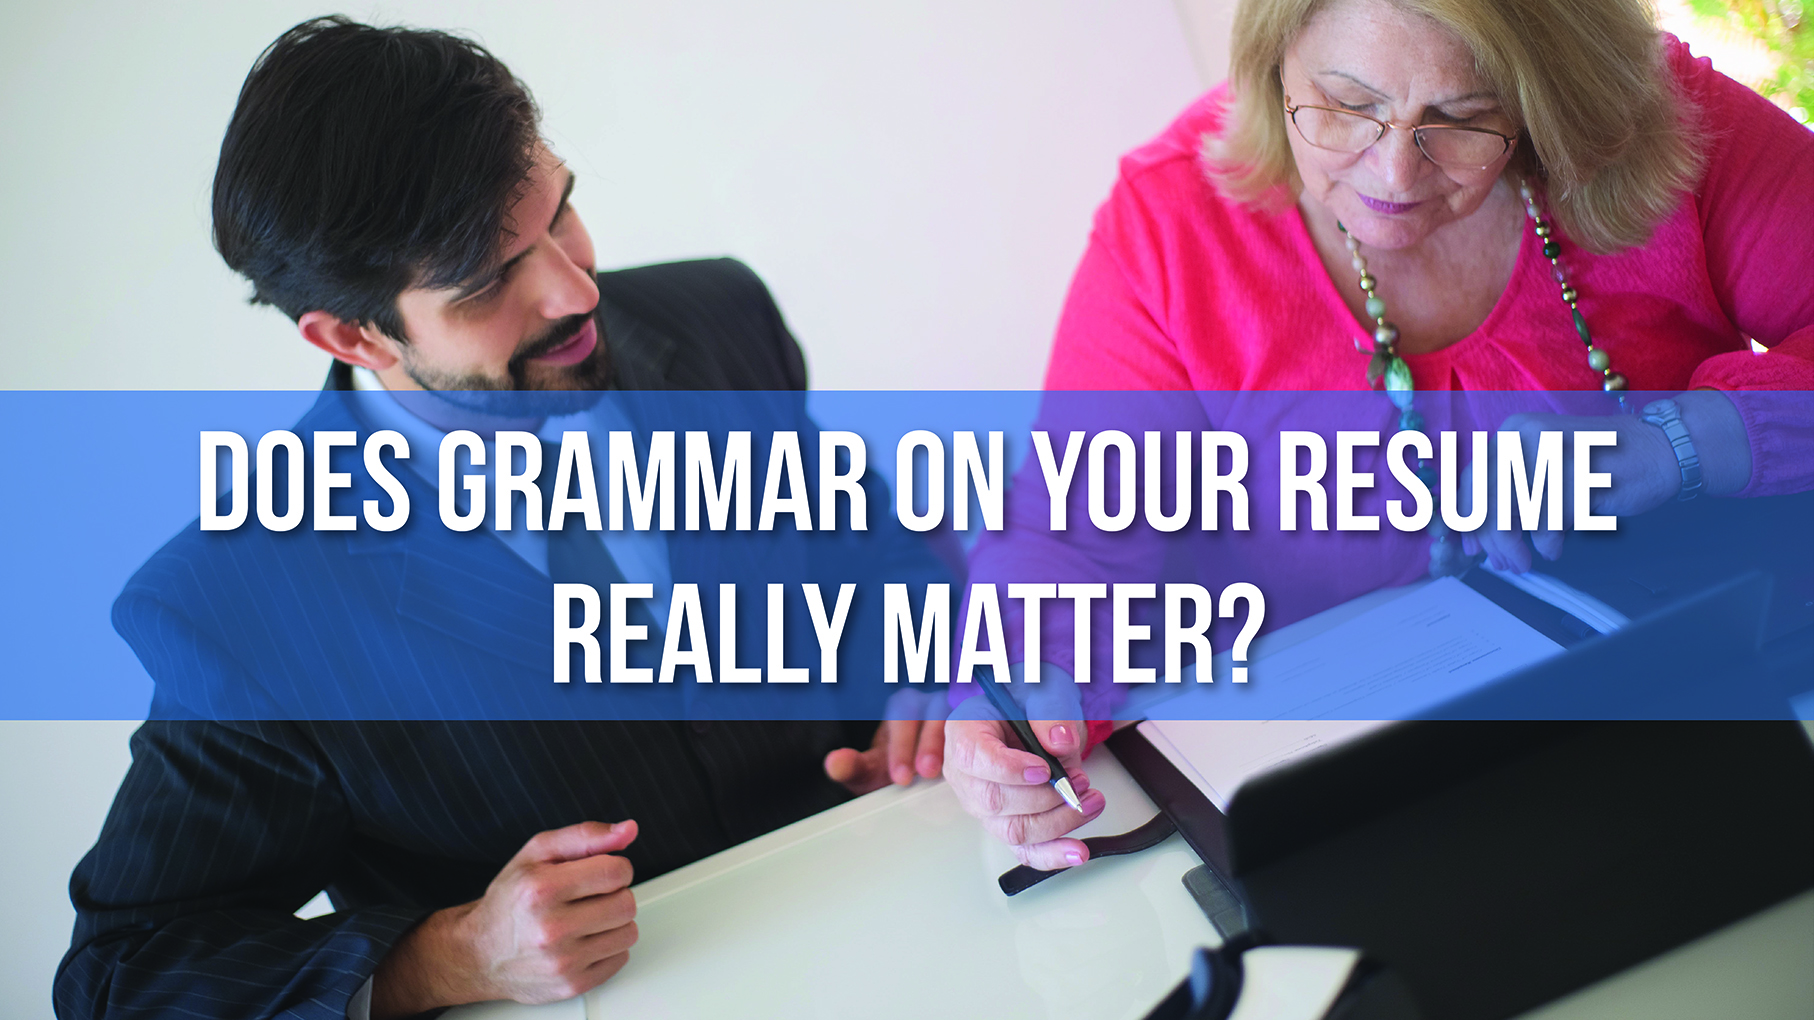 Does Grammar on Your Resume Really Matter?